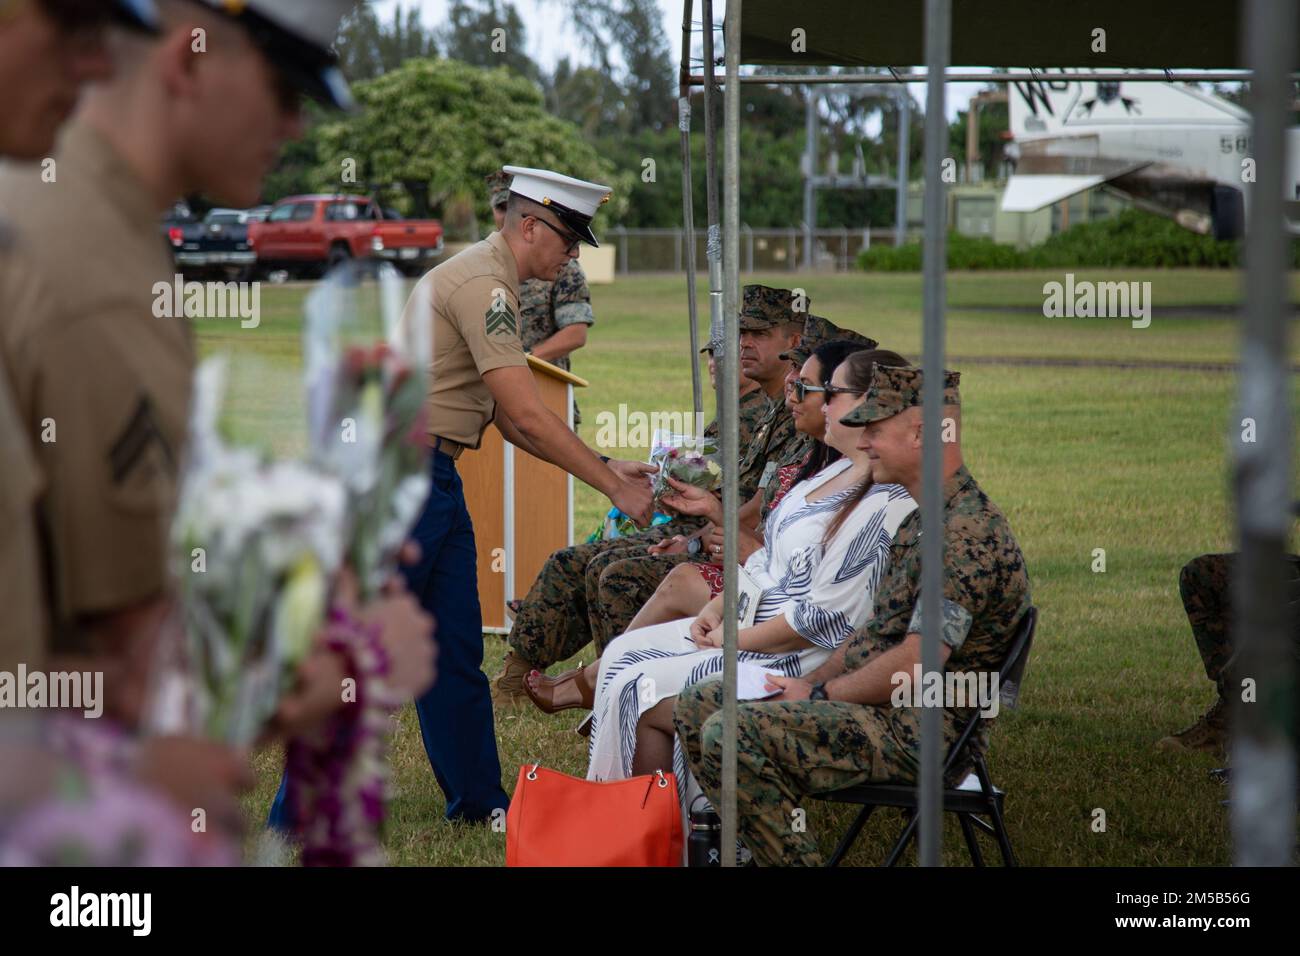 U.S. Marines with Marine Unmanned Aerial Vehicle Squadron (VMU) 3, give flowers to Sgt. Maj. Alejandro Garcia's wife as a thank you during a relief and appointment ceremony at Marine Corps Base Hawaii, Hawaii, Feb. 18th, 2022. During the ceremony Sgt. Maj. Andrew Radford relieved Sgt. Maj. Alejandro Garcia as Sergeant Major of VMU-3. The ceremony symbolizes the passing of trust and confidence from the outgoing Sergeant Major to the incoming Sergeant Major. Stock Photo